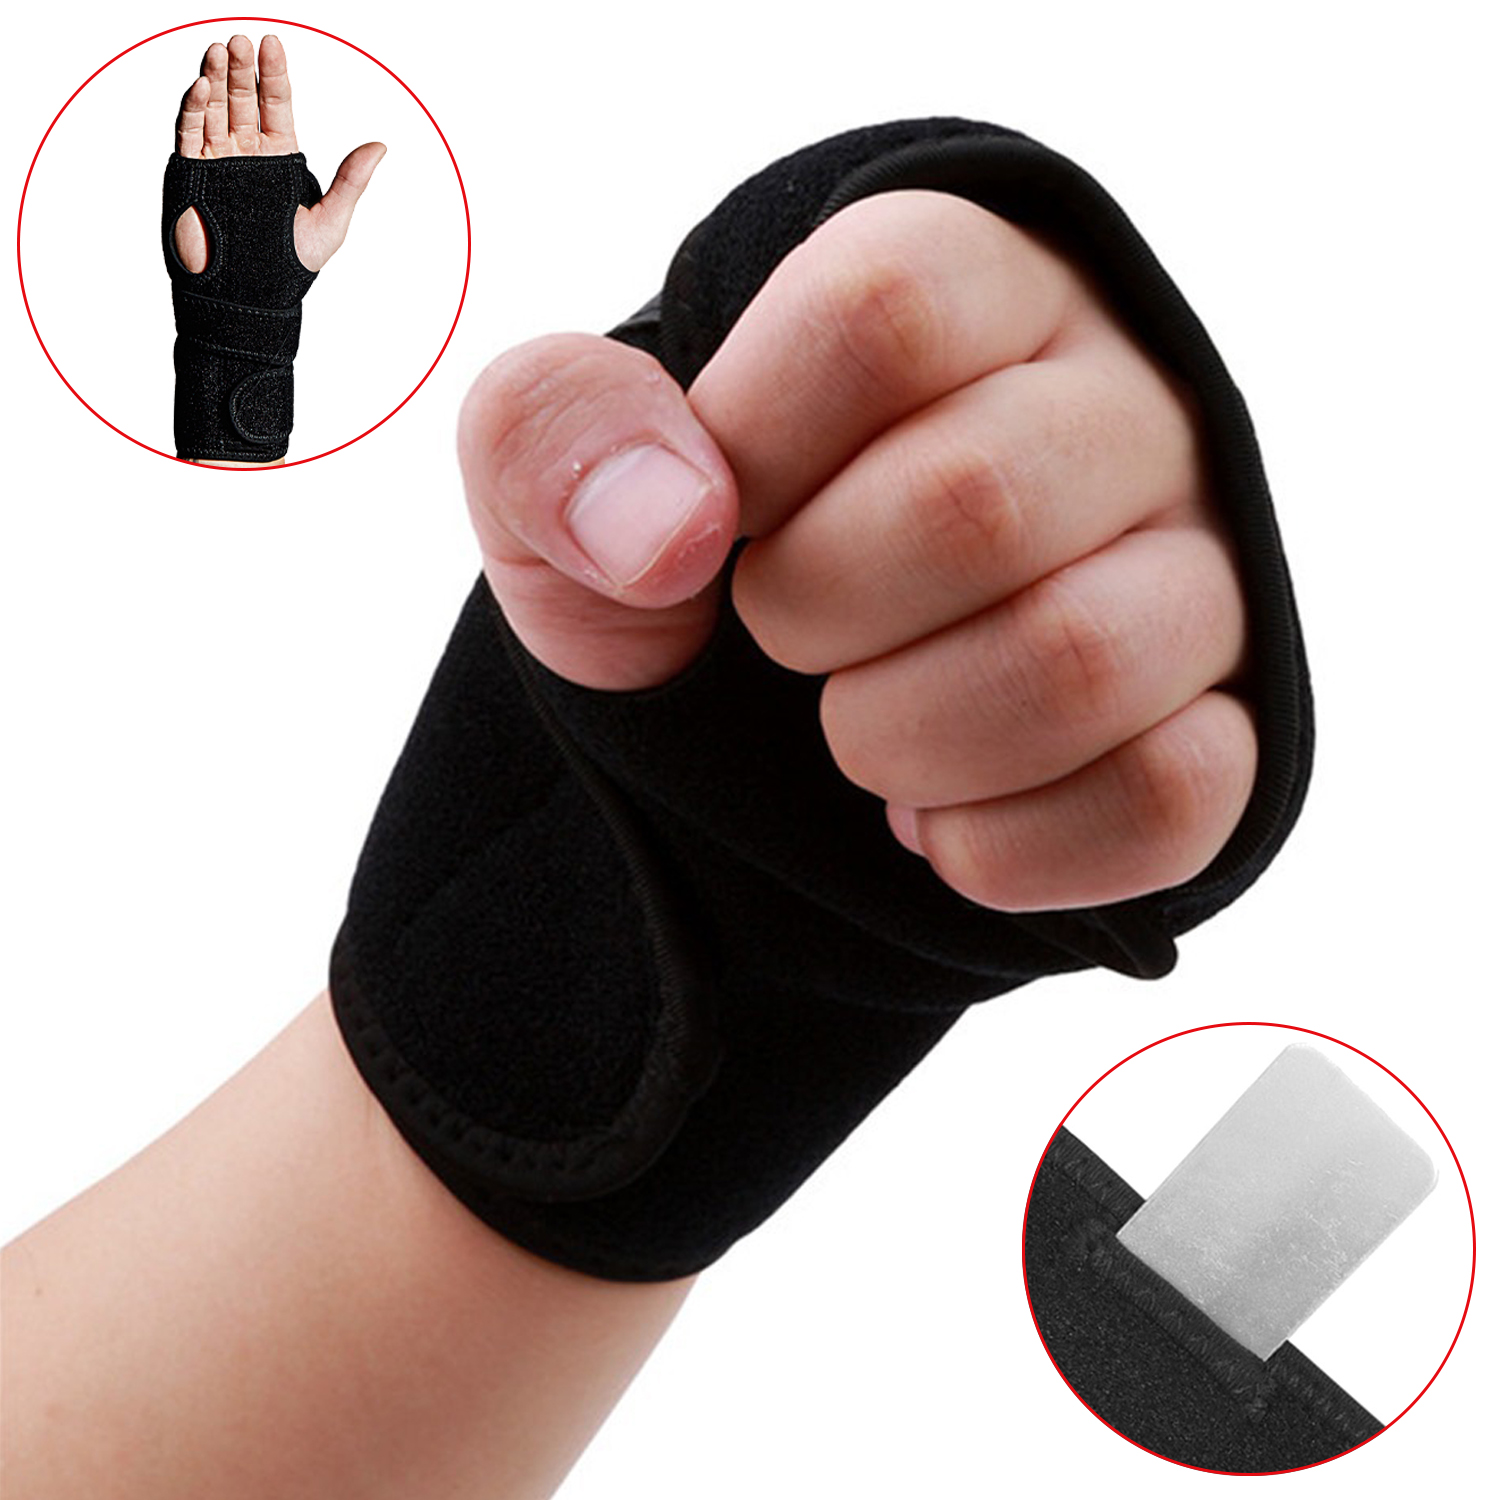 Adjustable Wrist Wraps for Men And Women Lightweight And Breathable Wrist Splint Brace for Sports Supports